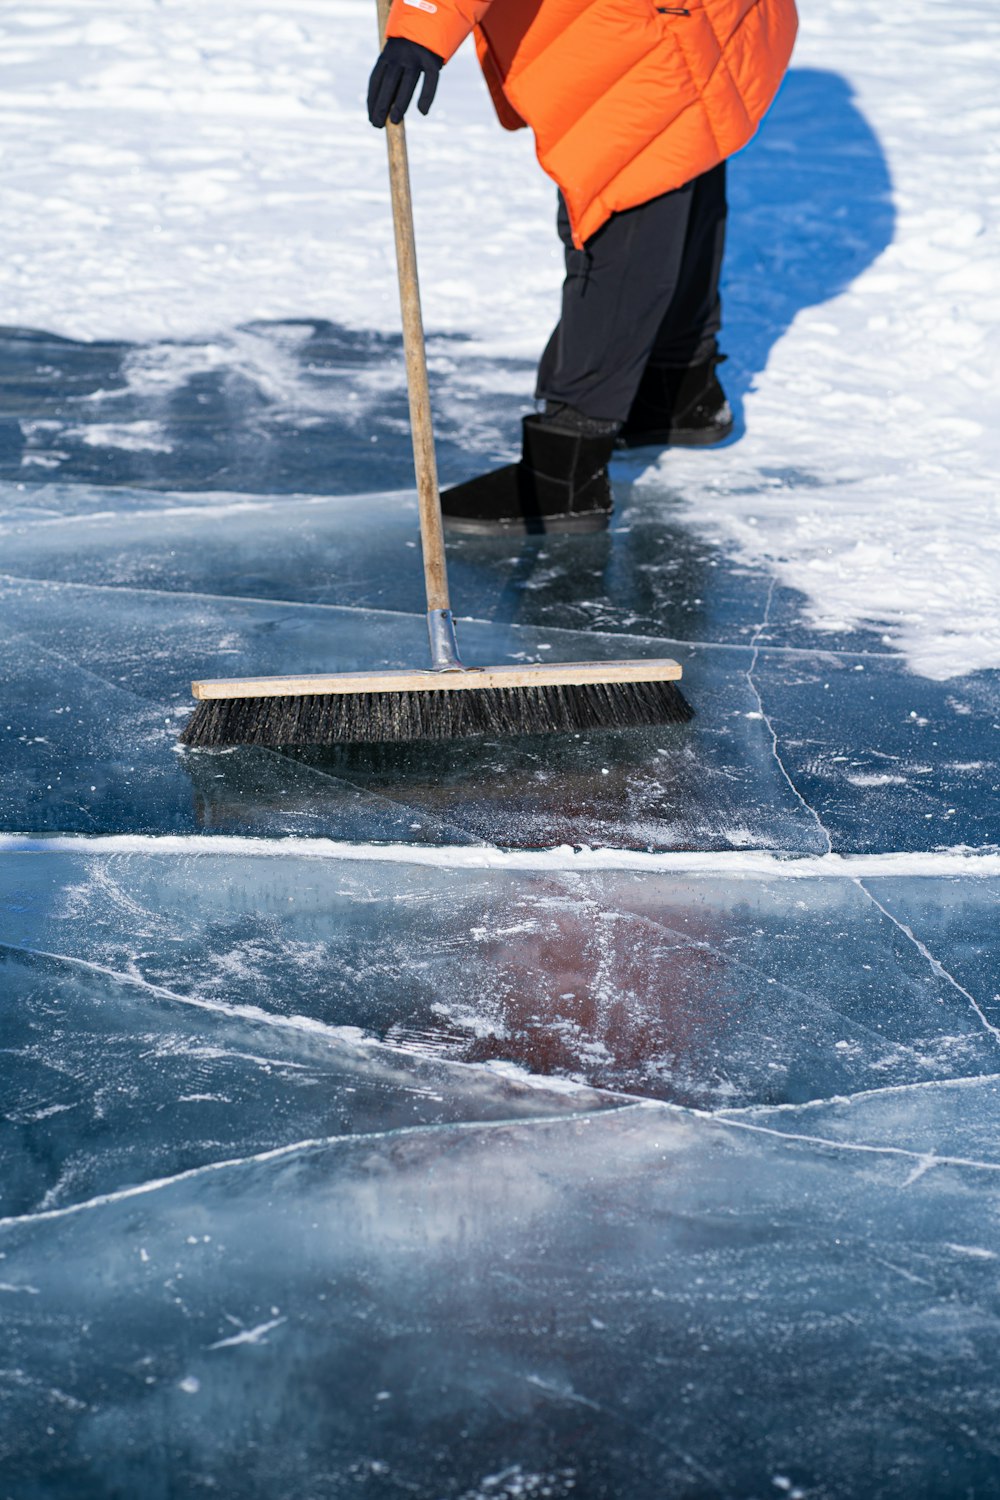 a person in an orange jacket is cleaning the ice with a broom